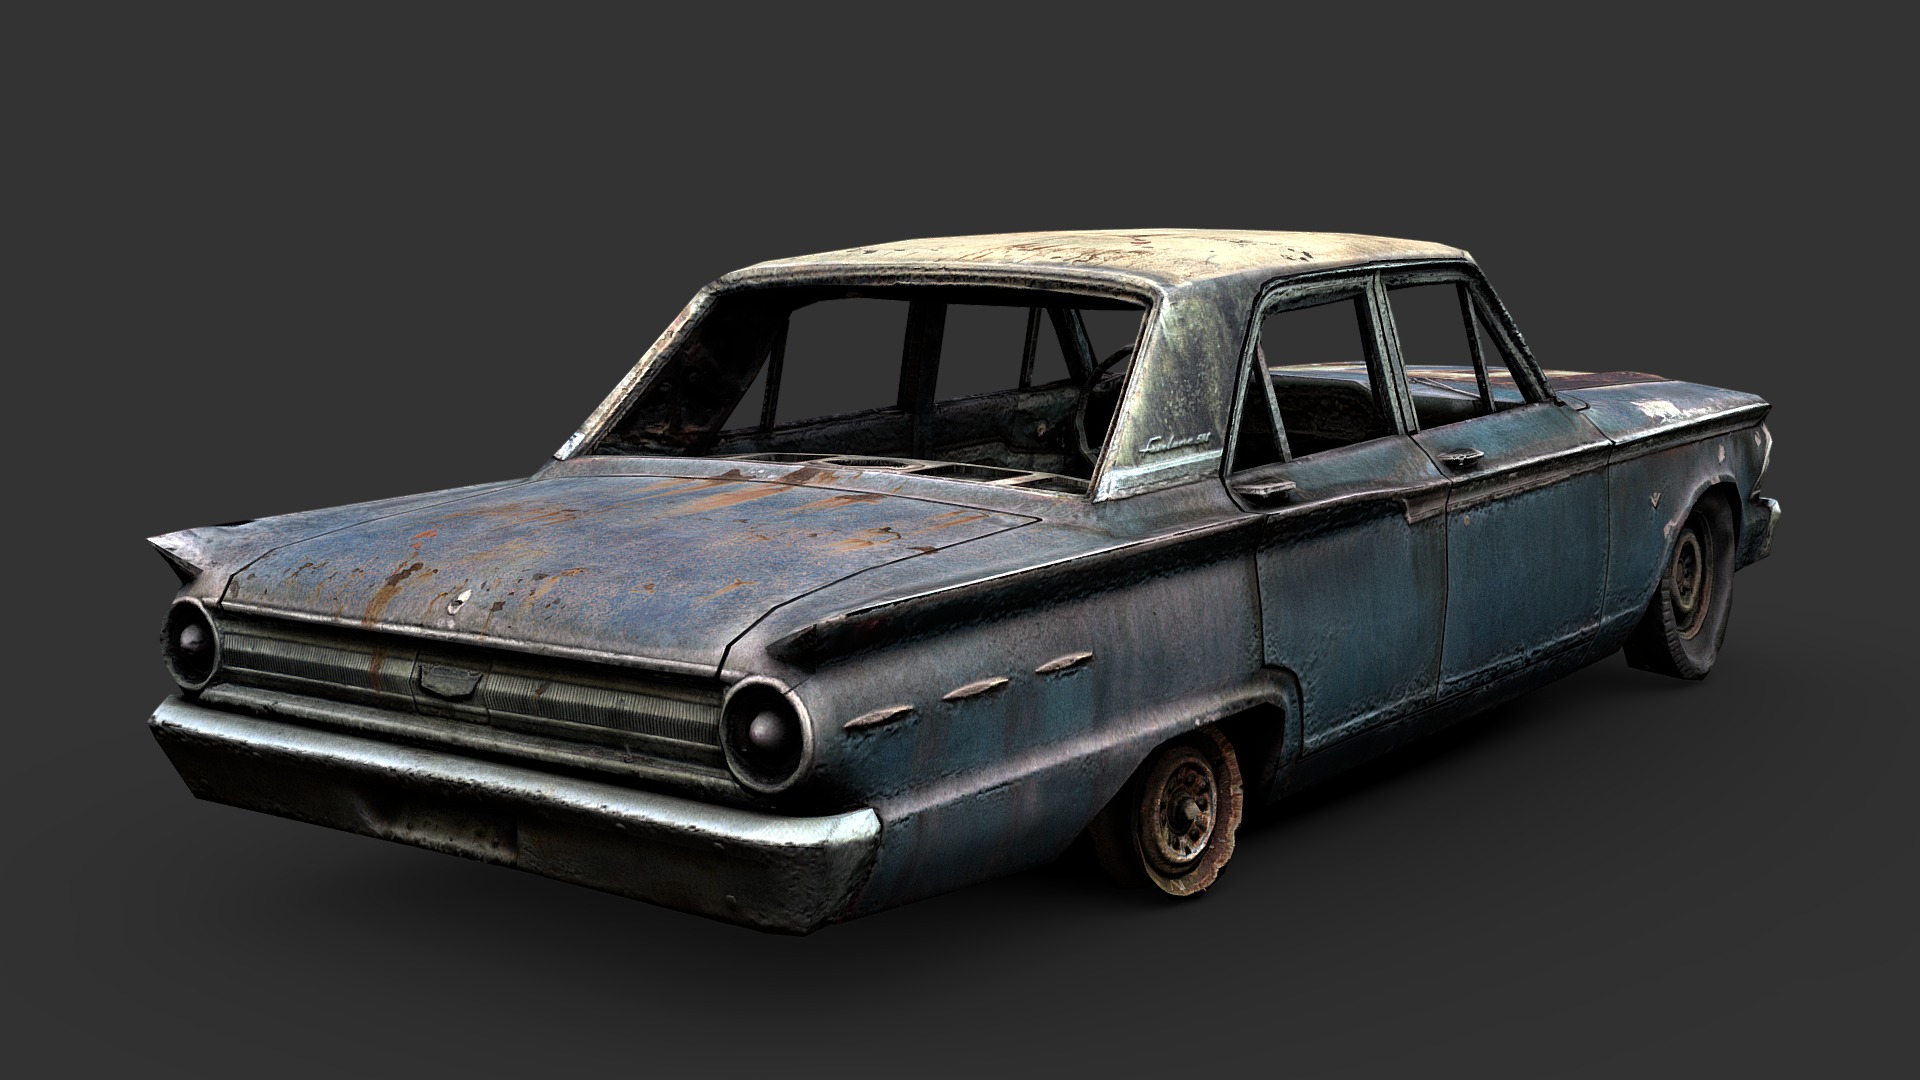 3D model Rusty 1960s Sedan - This is a 3D model of the Rusty 1960s Sedan. The 3D model is about a blue car with a wooden roof.